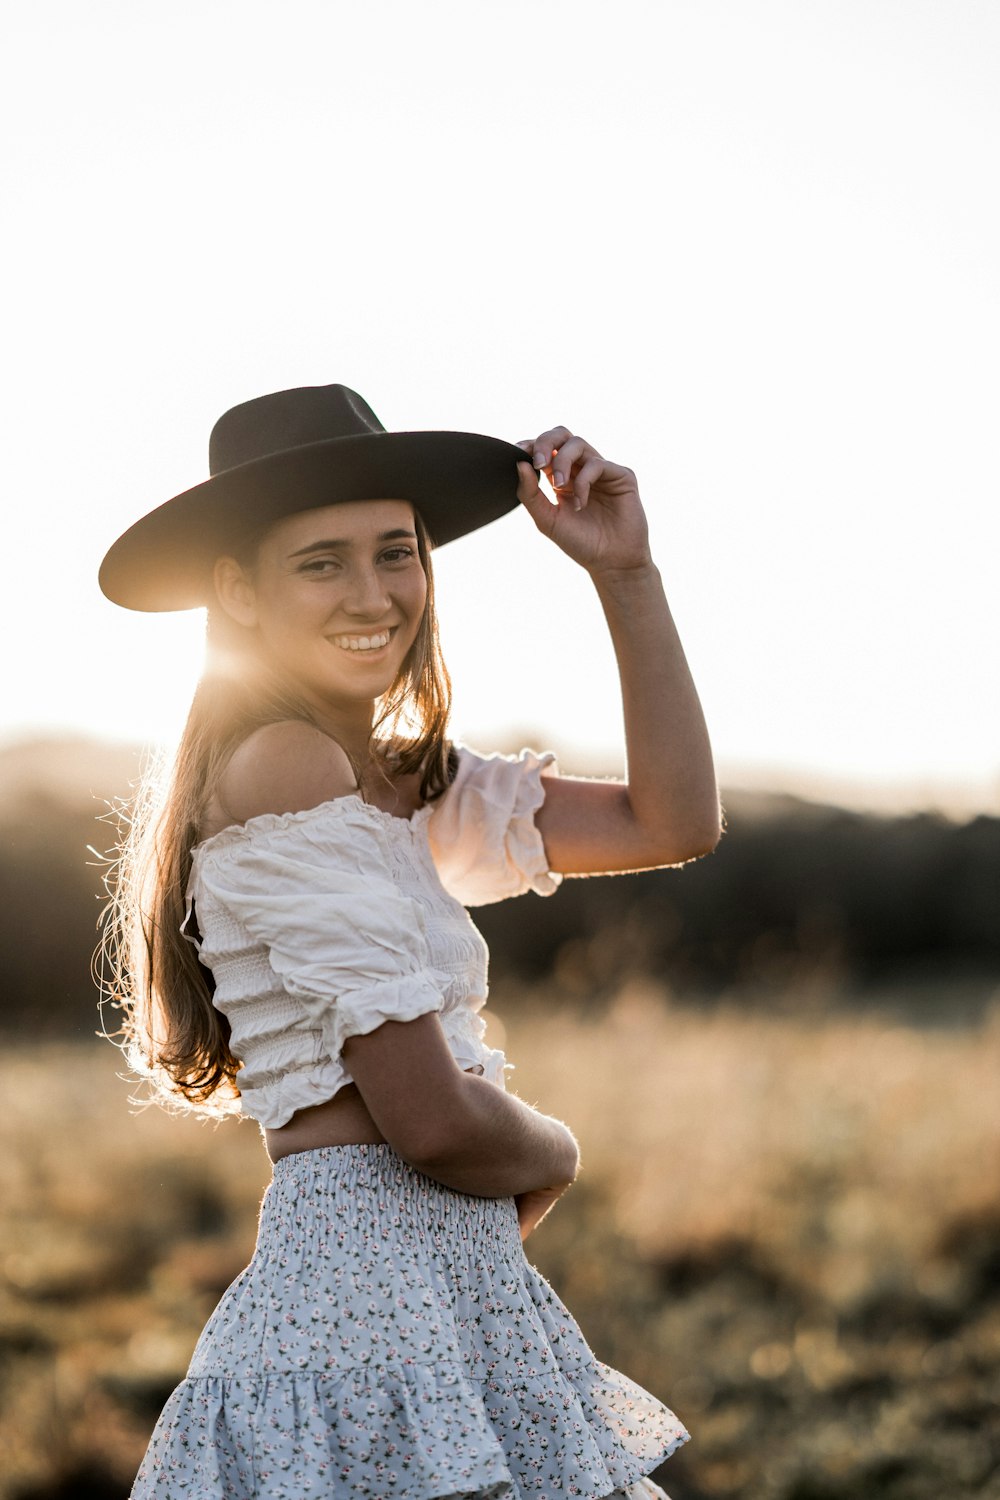 a young girl wearing a cowboy hat in a field